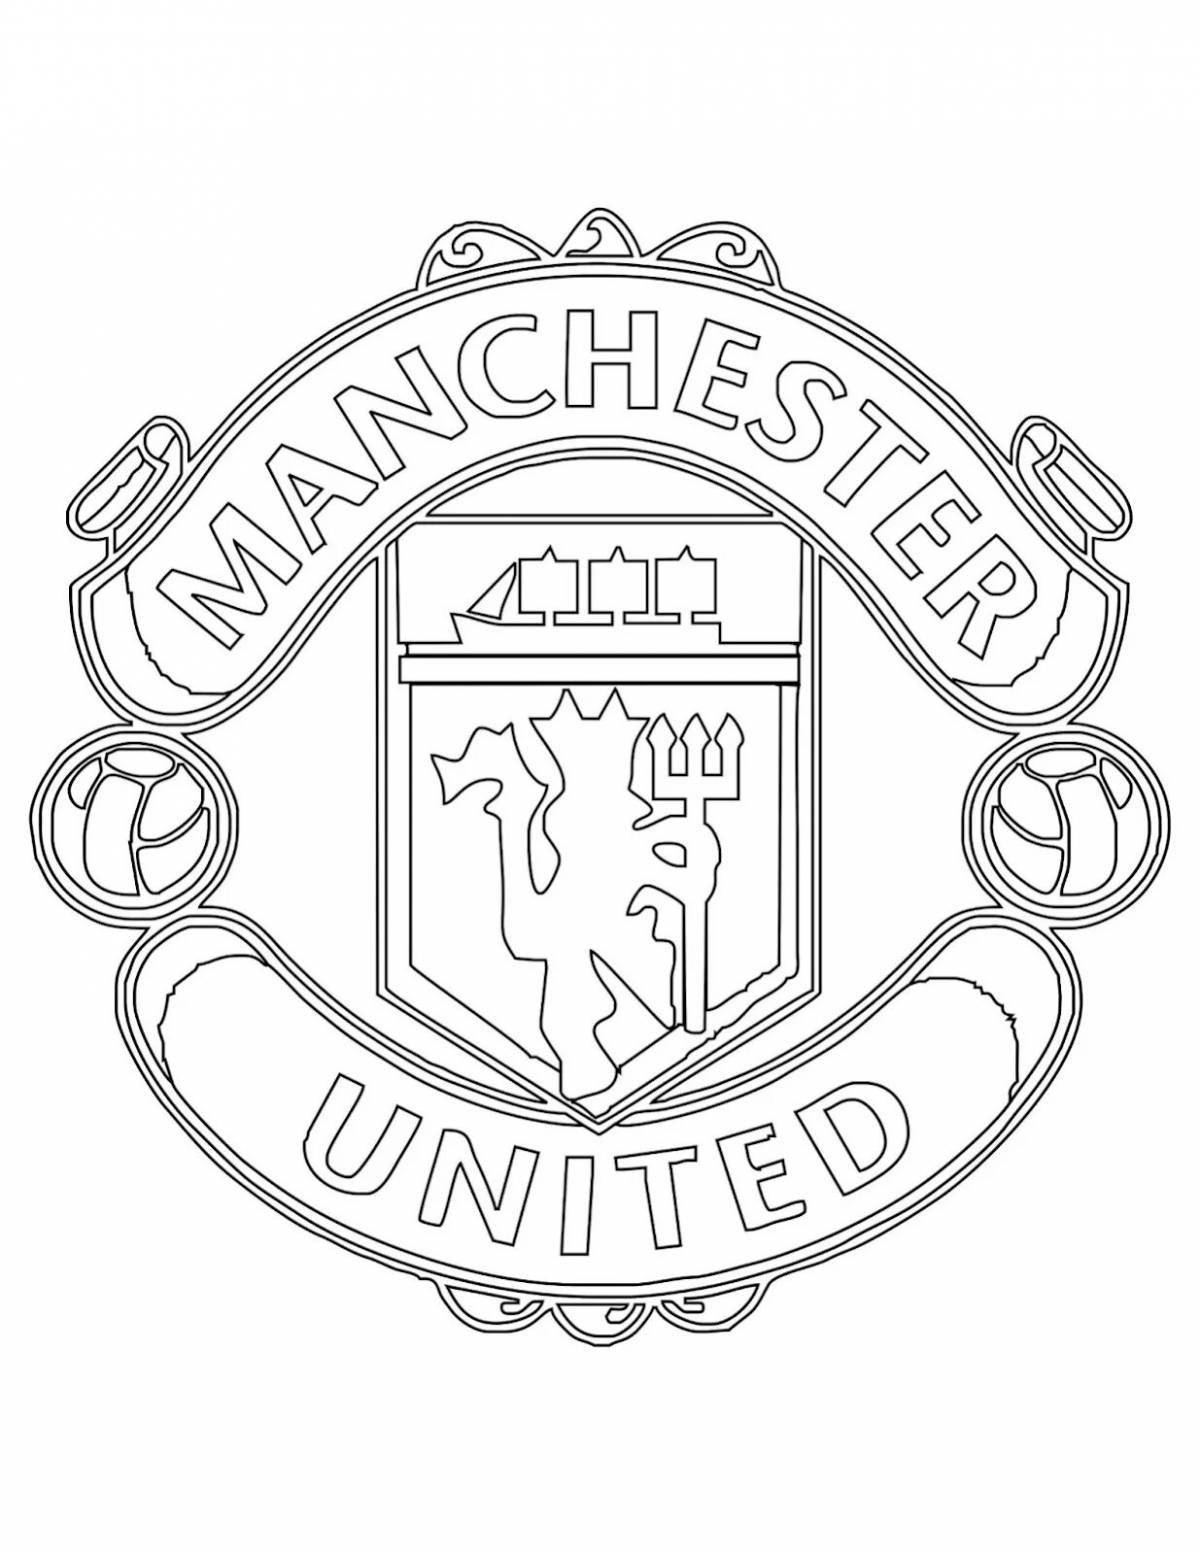 Coloring pages with football club logos